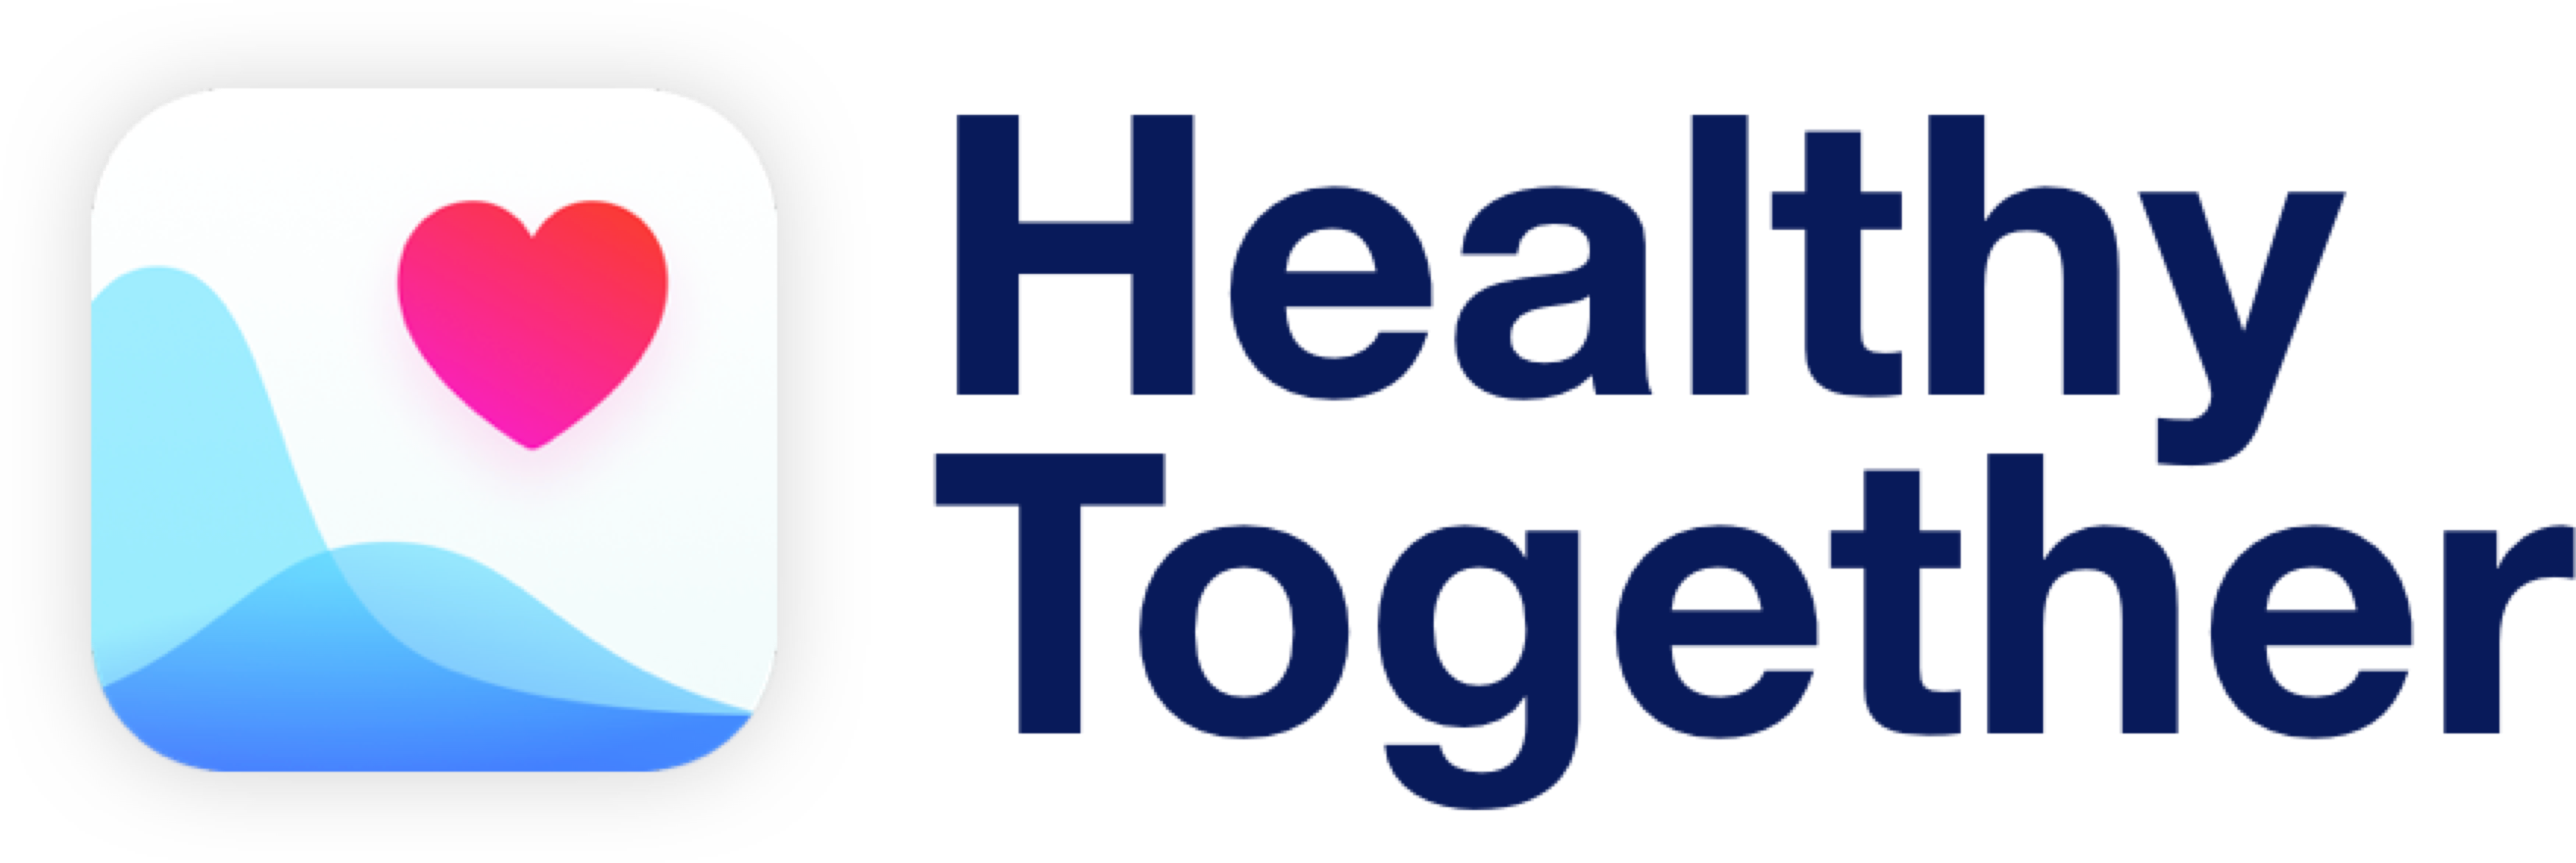 Healthy Together | COVID-19 G - Healthy Together